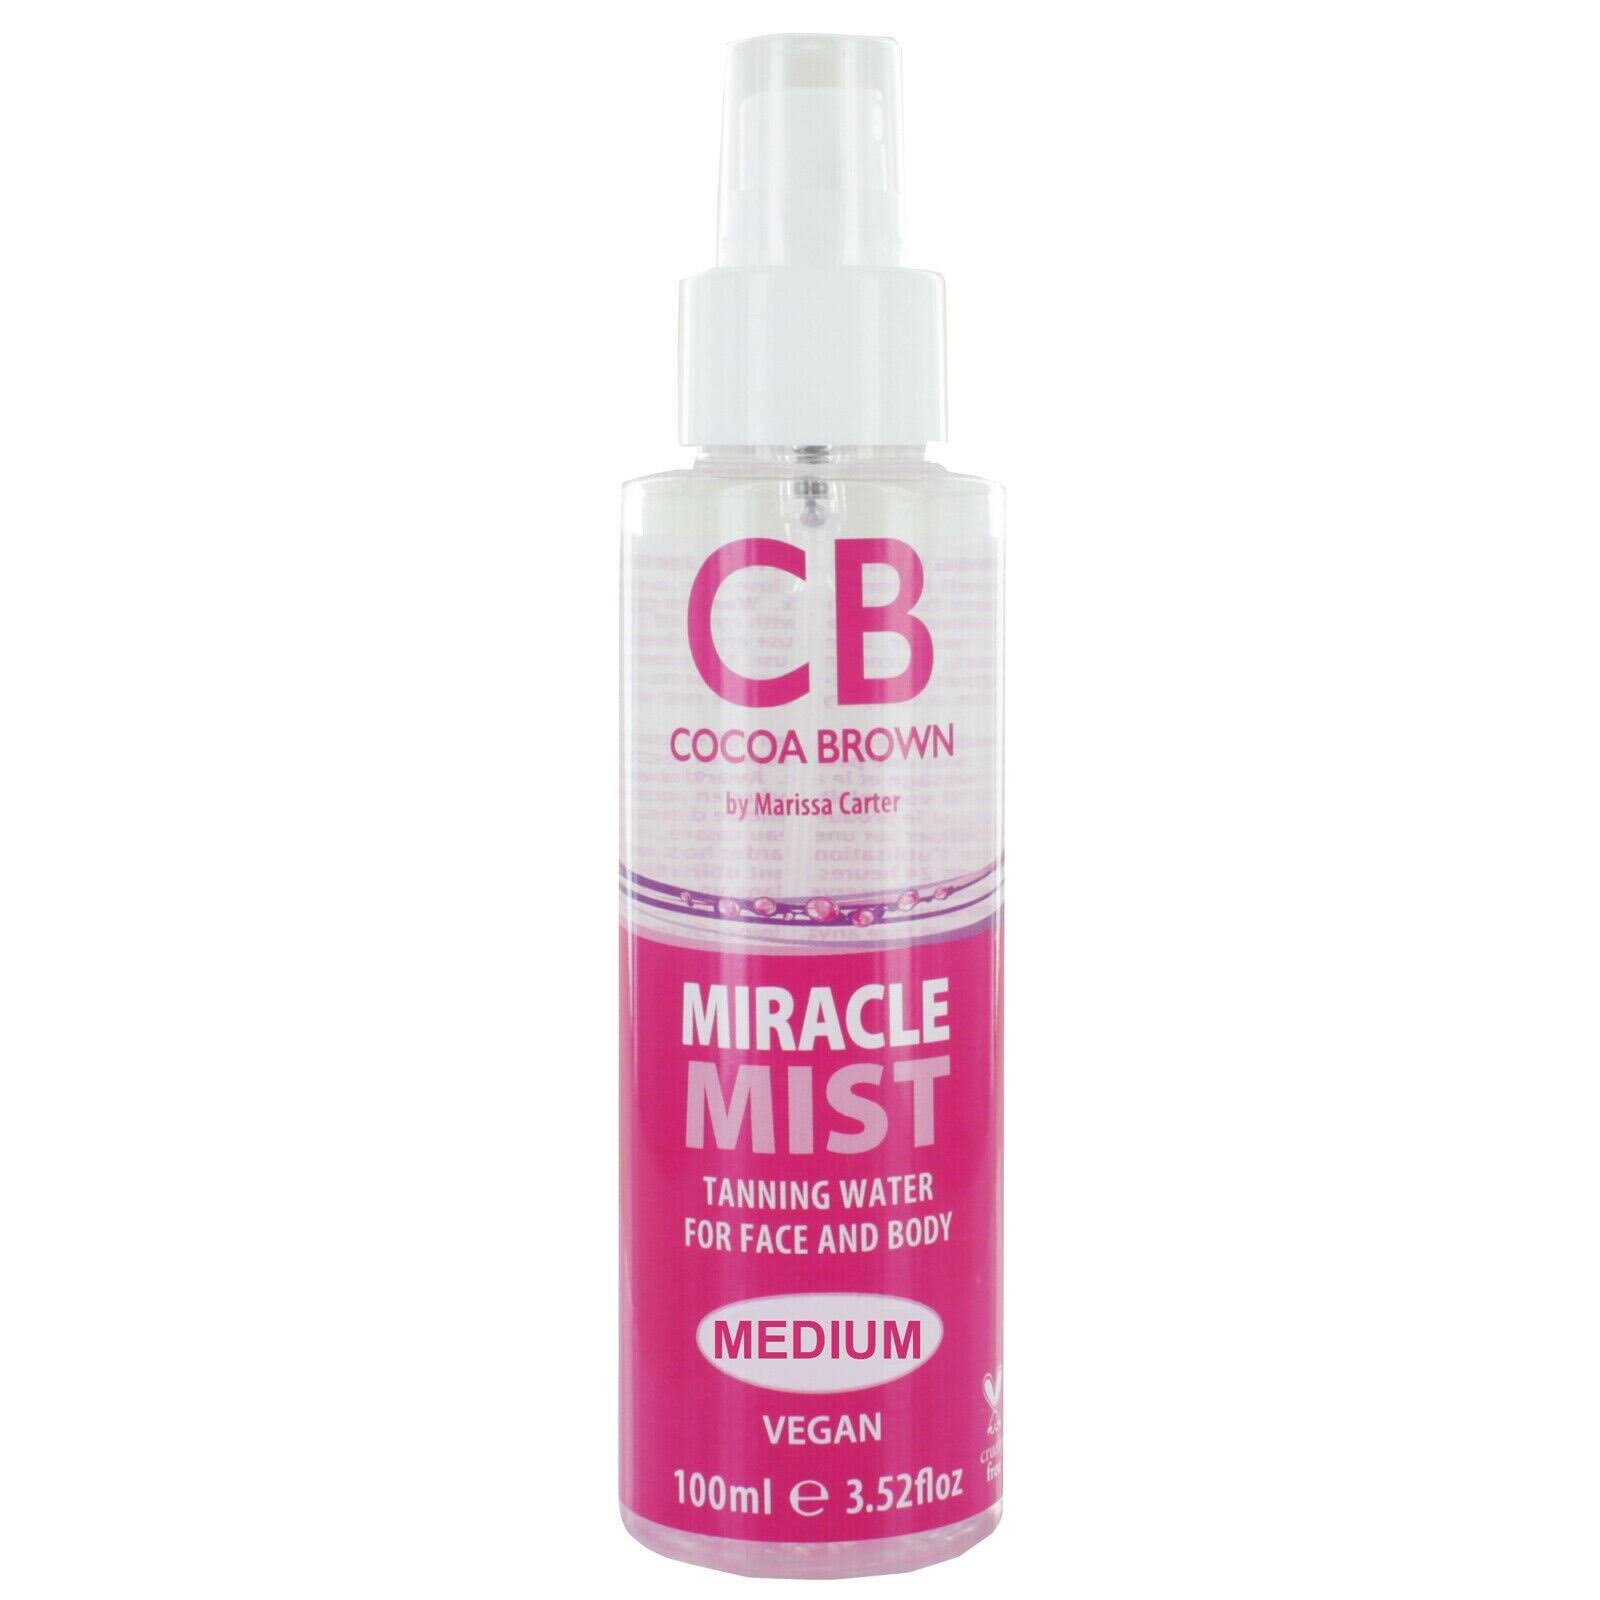 Cocoa Brown Miracle Mist Tanning Water Face & Body - 100ml Medium